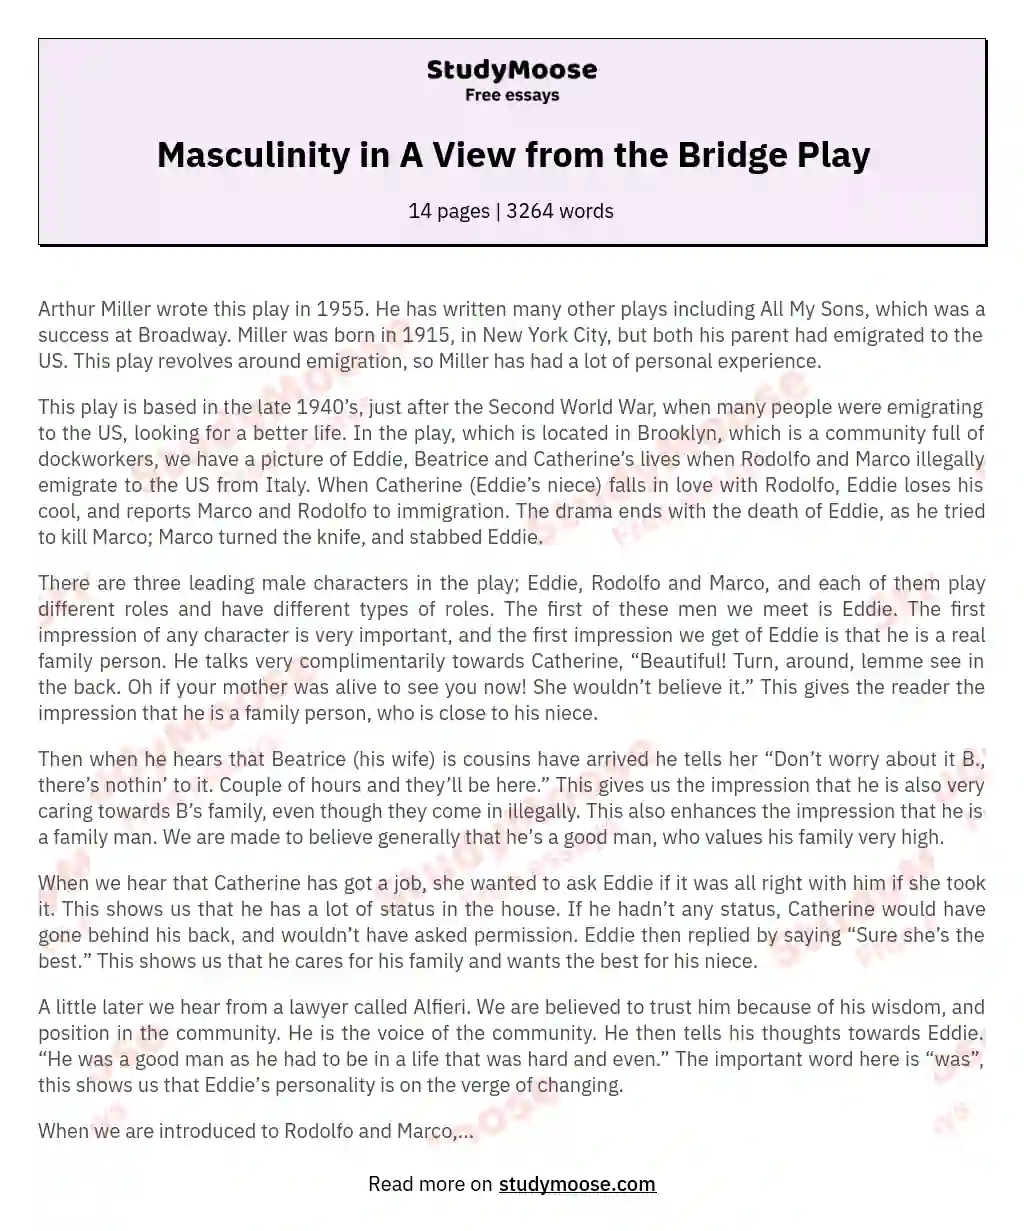 Masculinity in A View from the Bridge Play essay